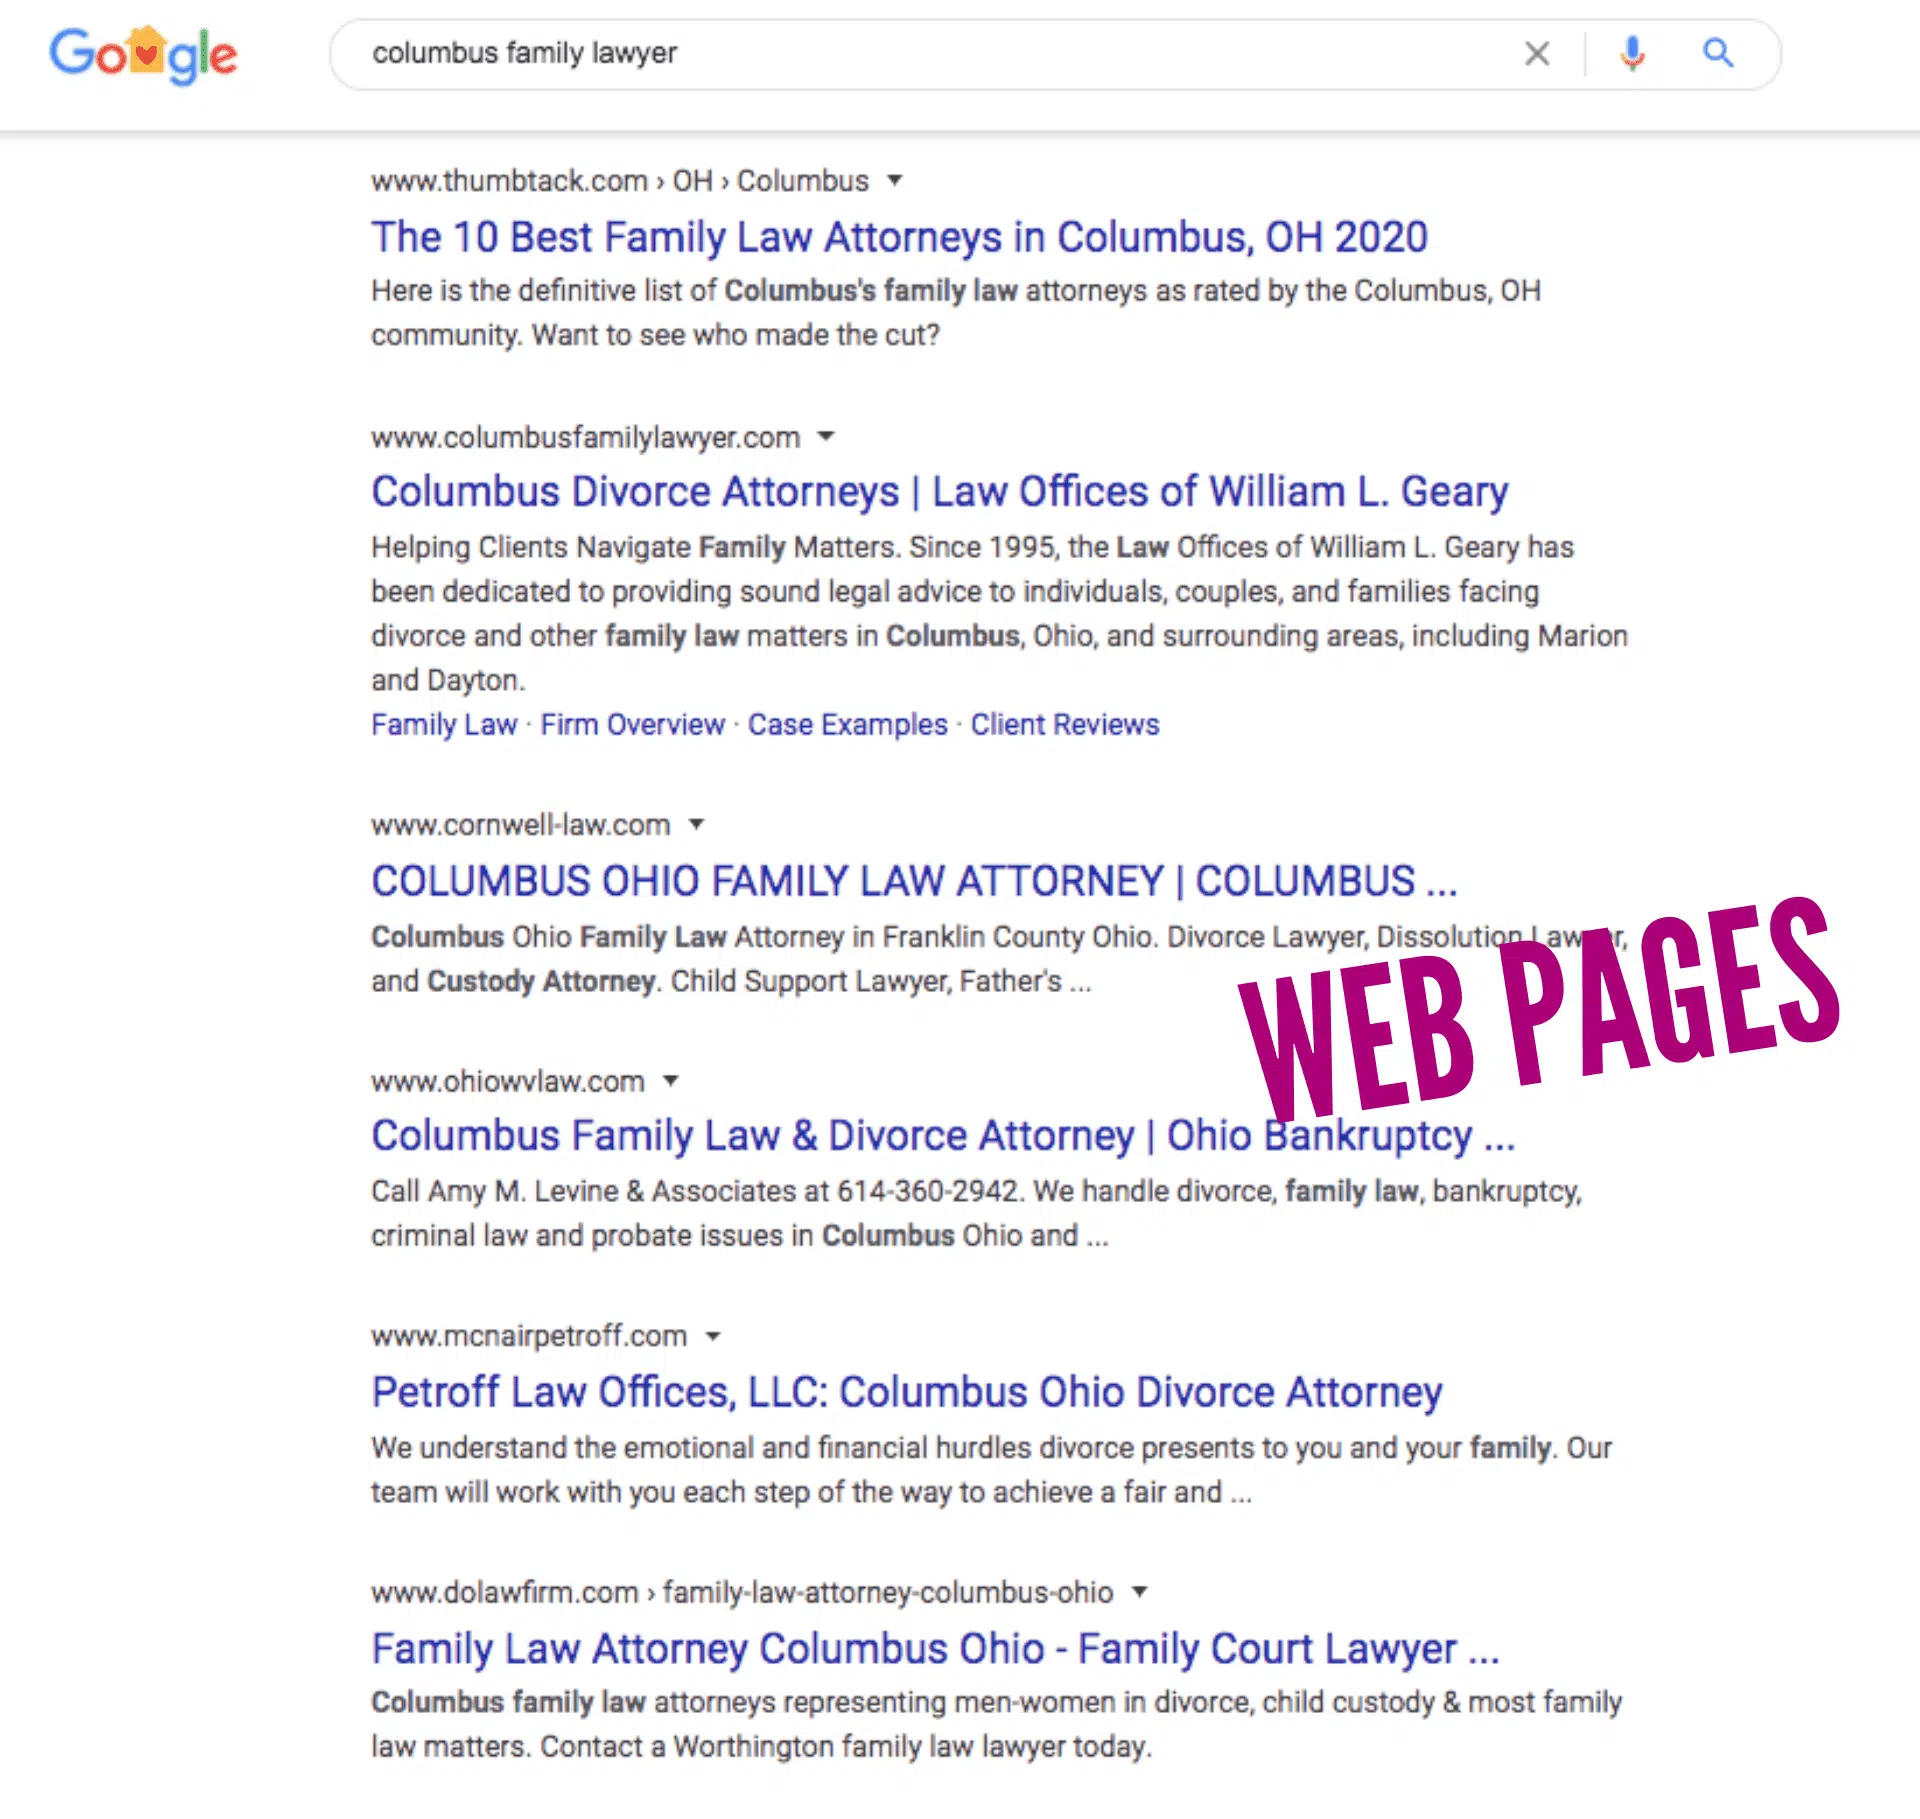 SERPs for "columbus family lawyer"